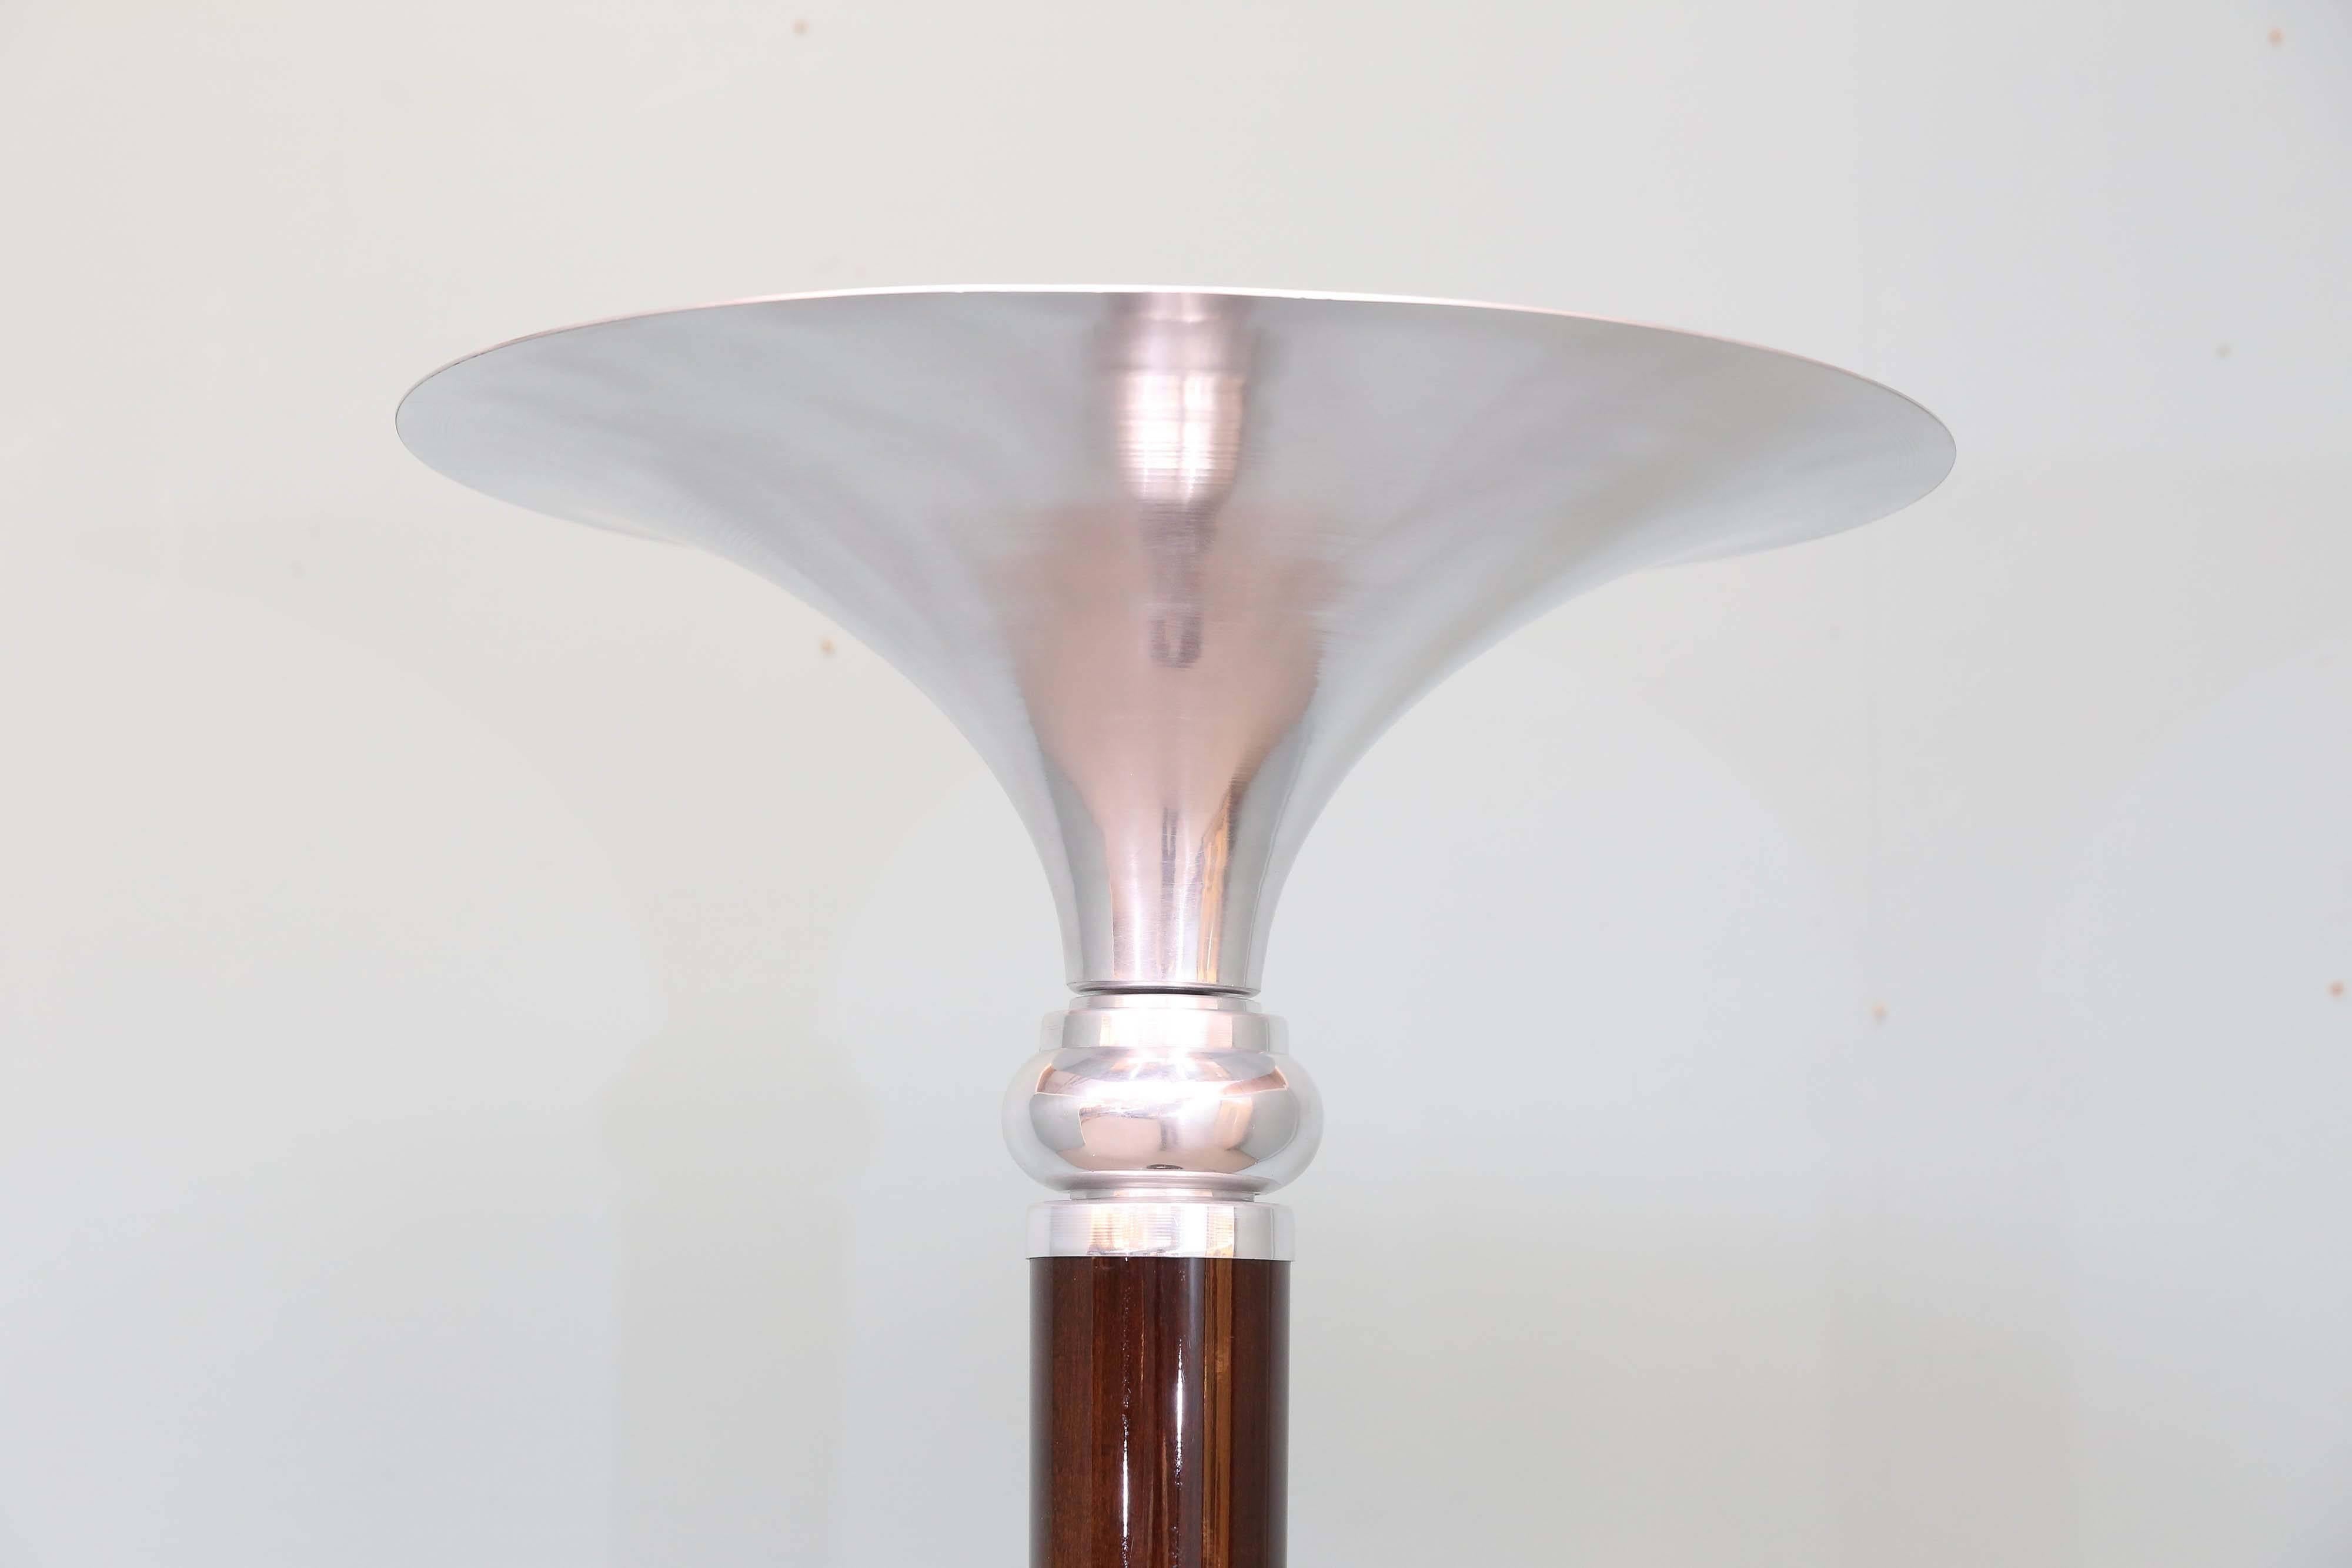 Funnel shape chrome lampshade is connected to the main pole and with a help of one chrome insert transfers to the wooden thick stabile base of the lamp. Due to the highly polished chrome, the light strongly irradiates and spreads through the space